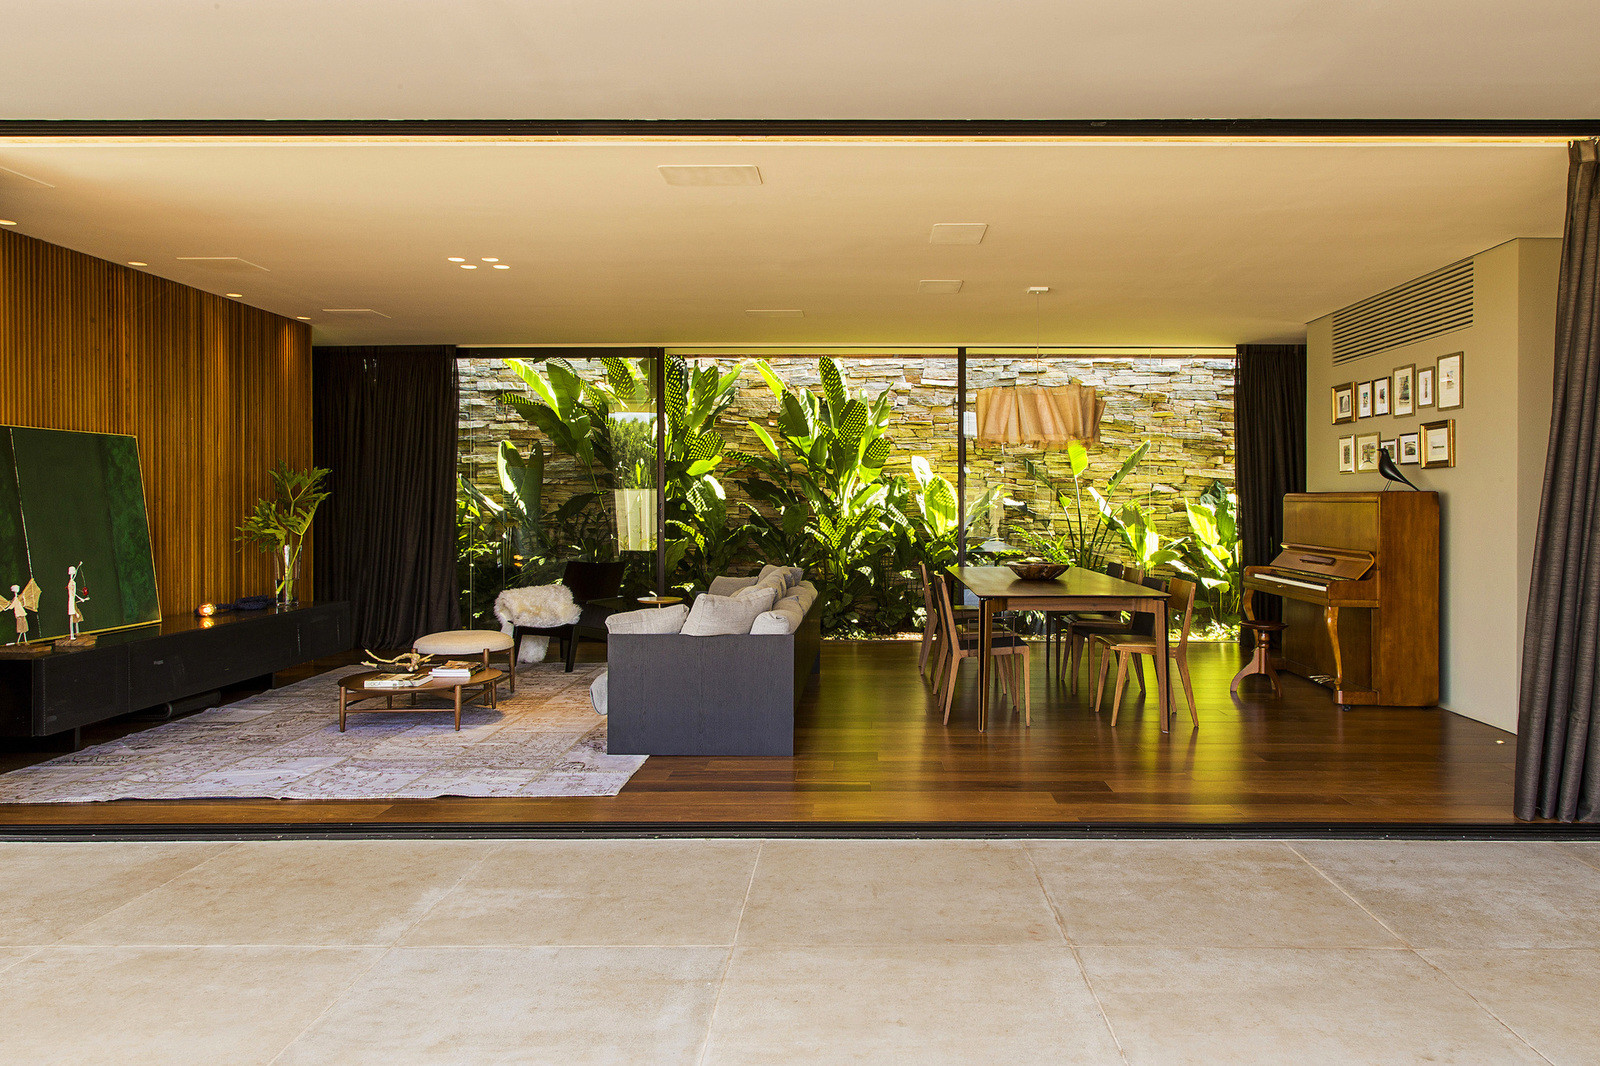 Private house with features of Brazilian modernism